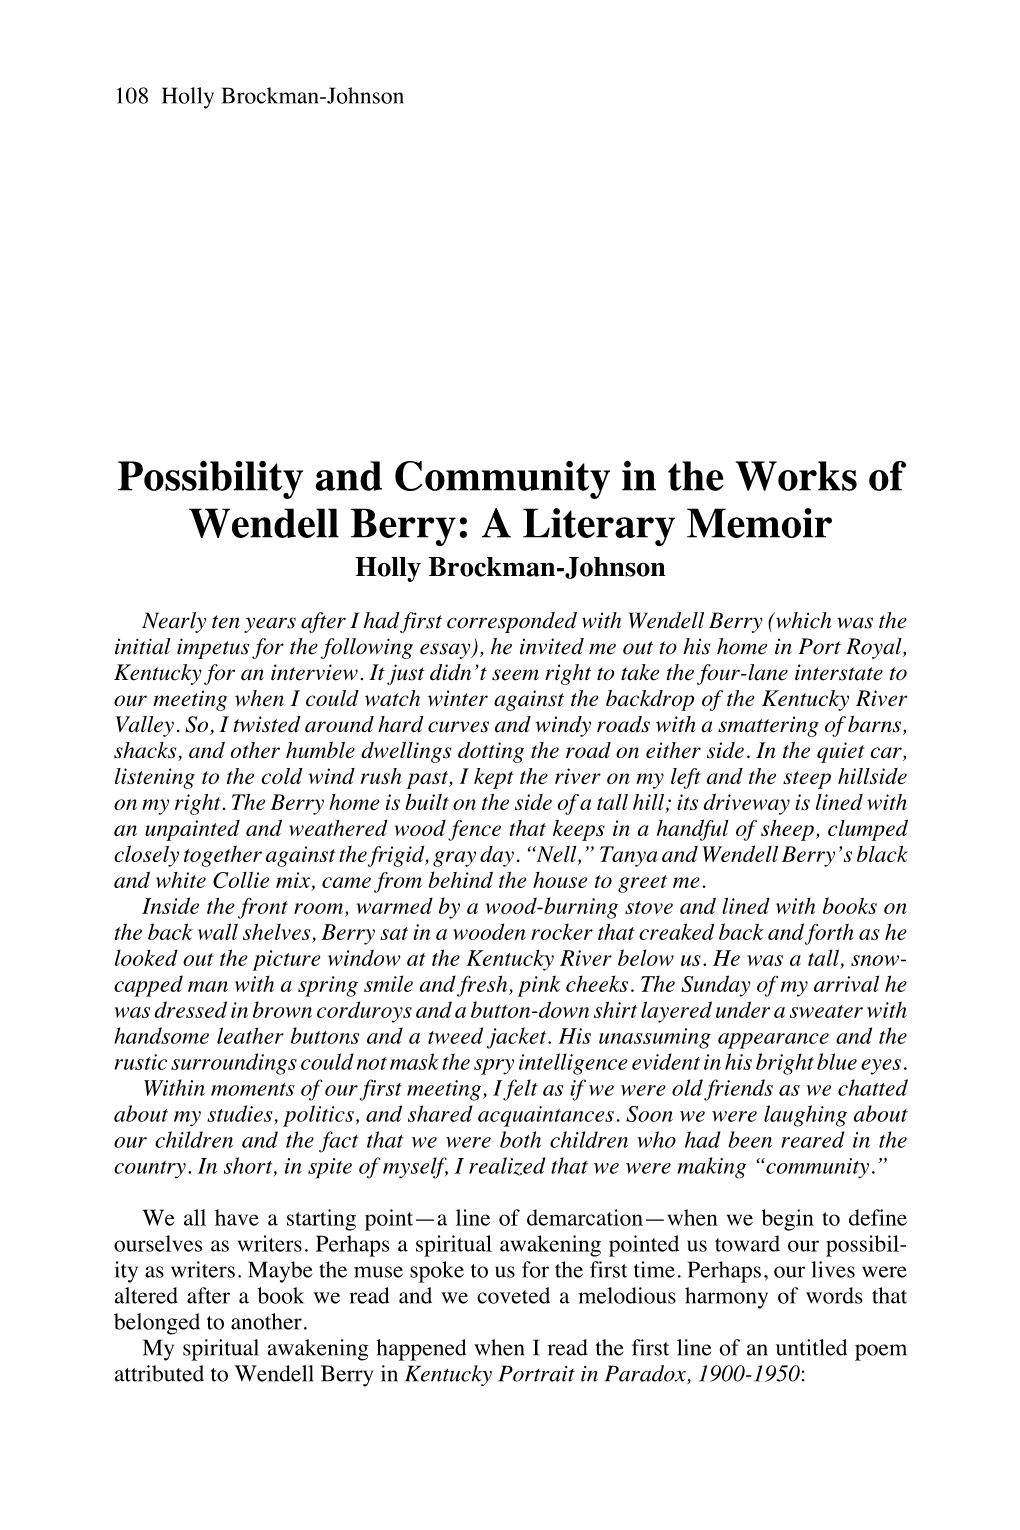 Possibility and Community in the Works of Wendell Berry: a Literary Memoir Holly Brockman-Johnson